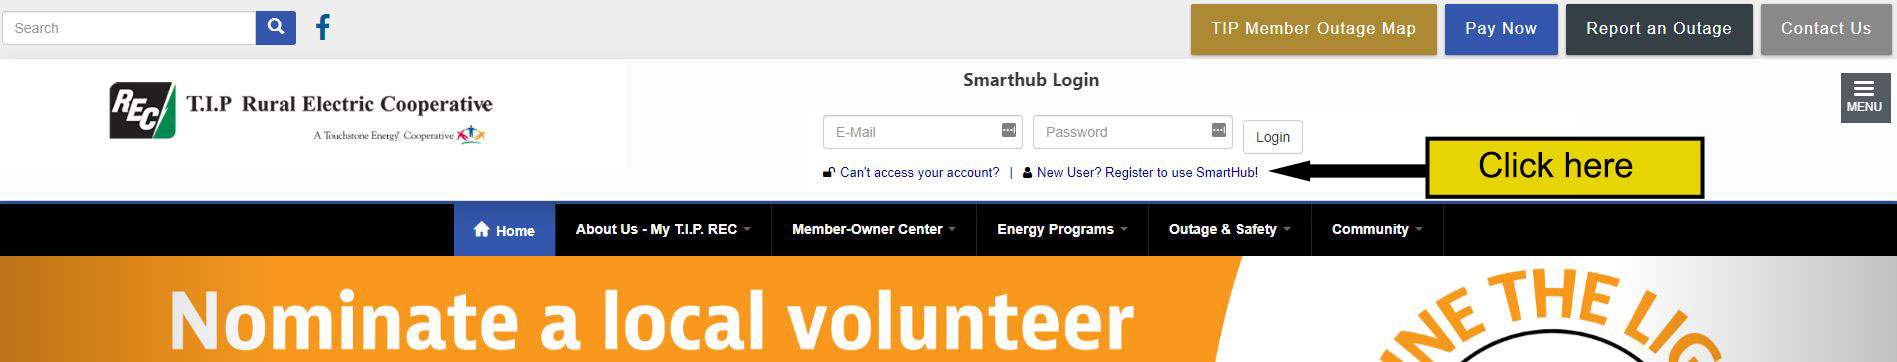 SmartHub login graphic from home page